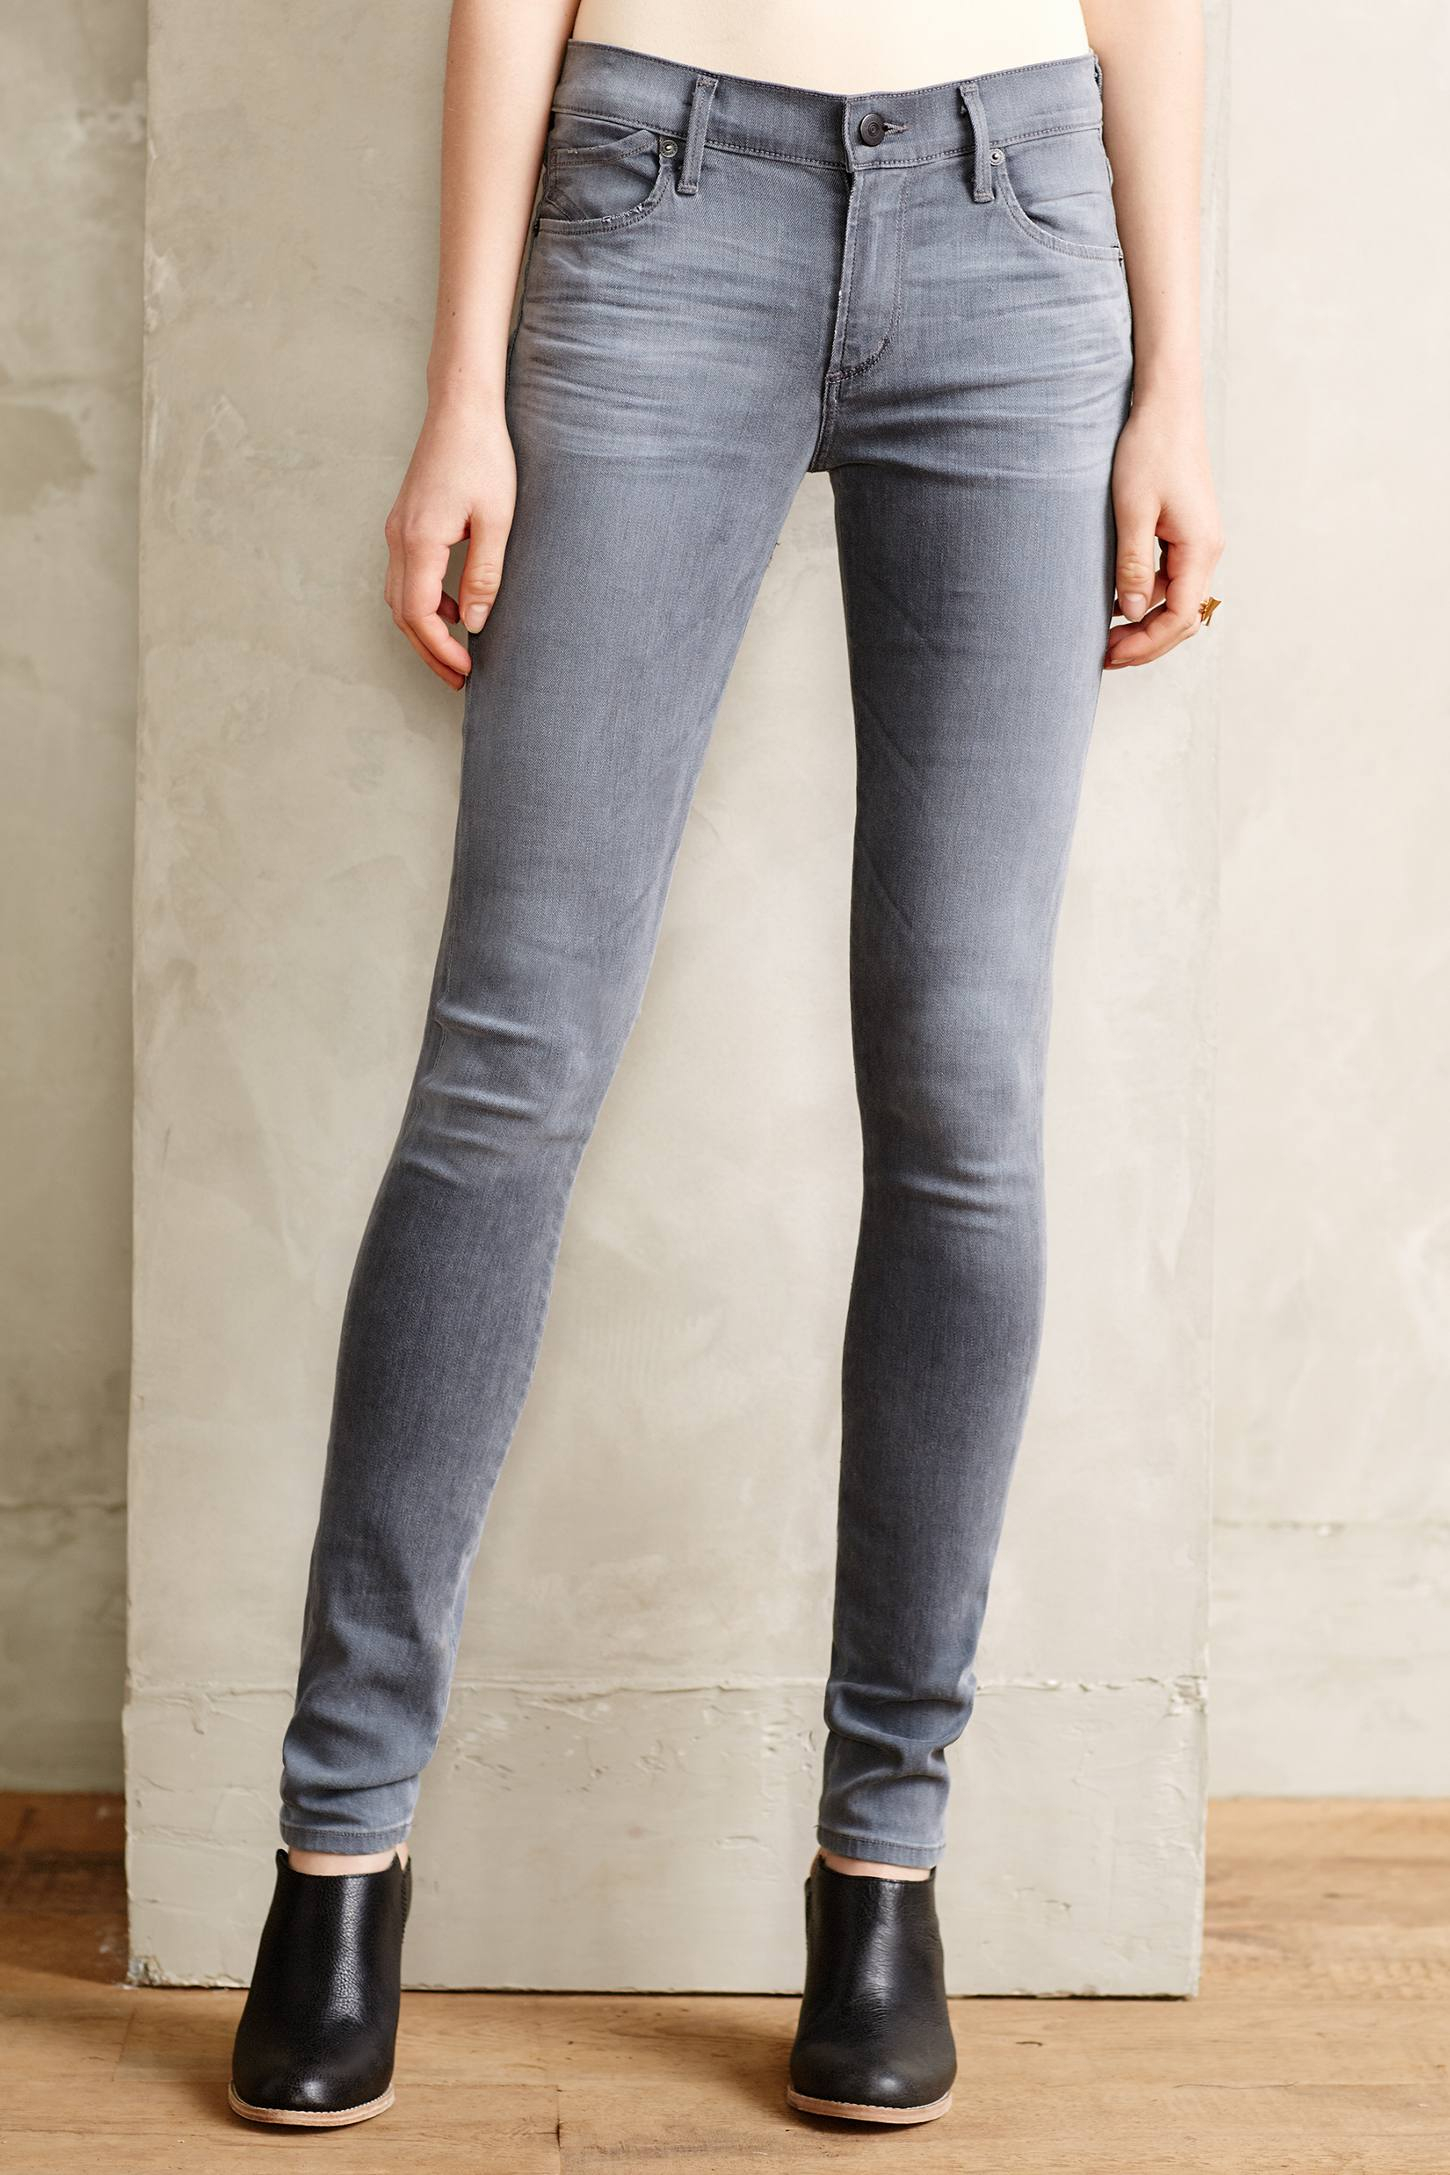 Citizens Of Humanity Avedon Ultra Skinny Jeans in Gray (Chromatic) | Lyst